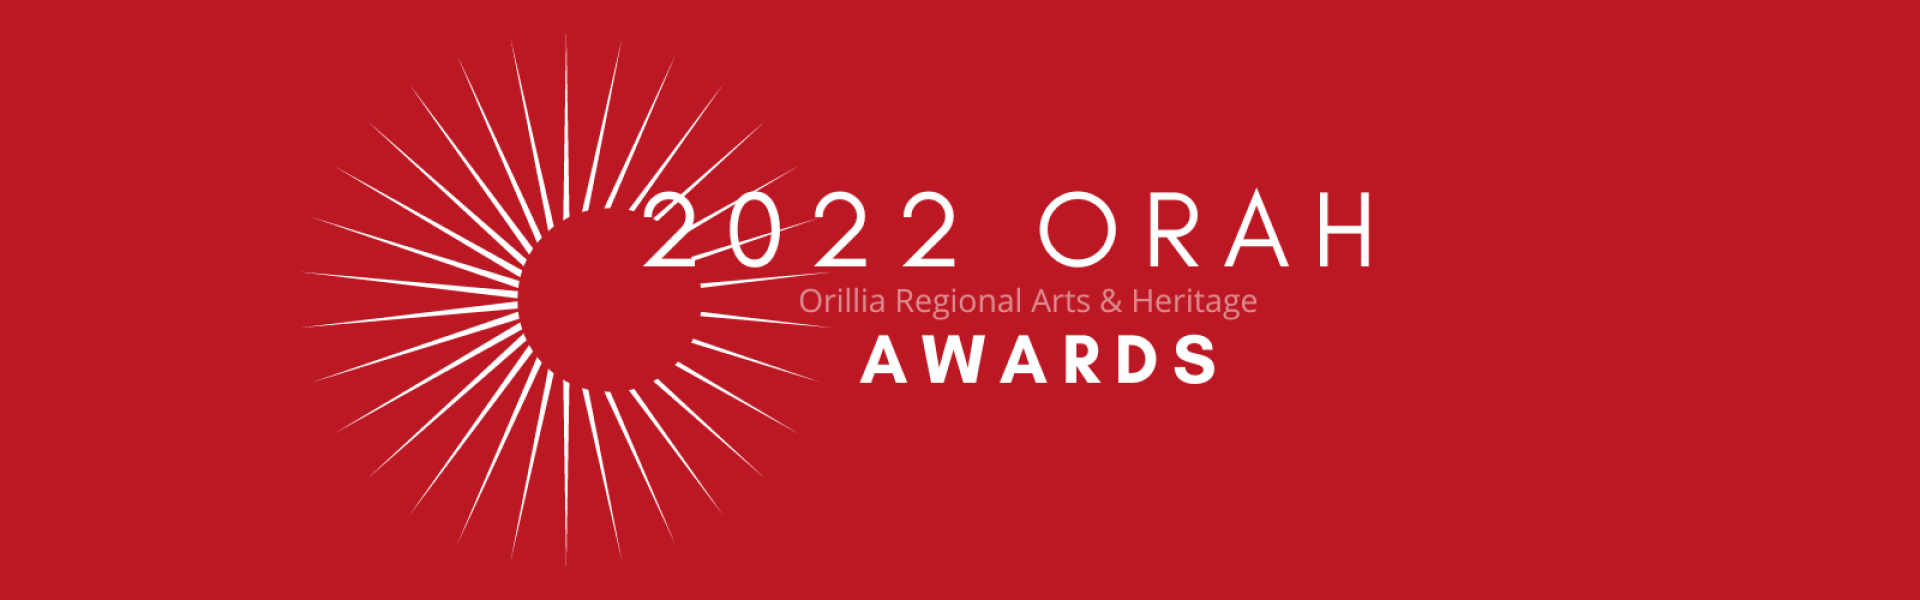 Nominations are now open for the annual ORAH Awards